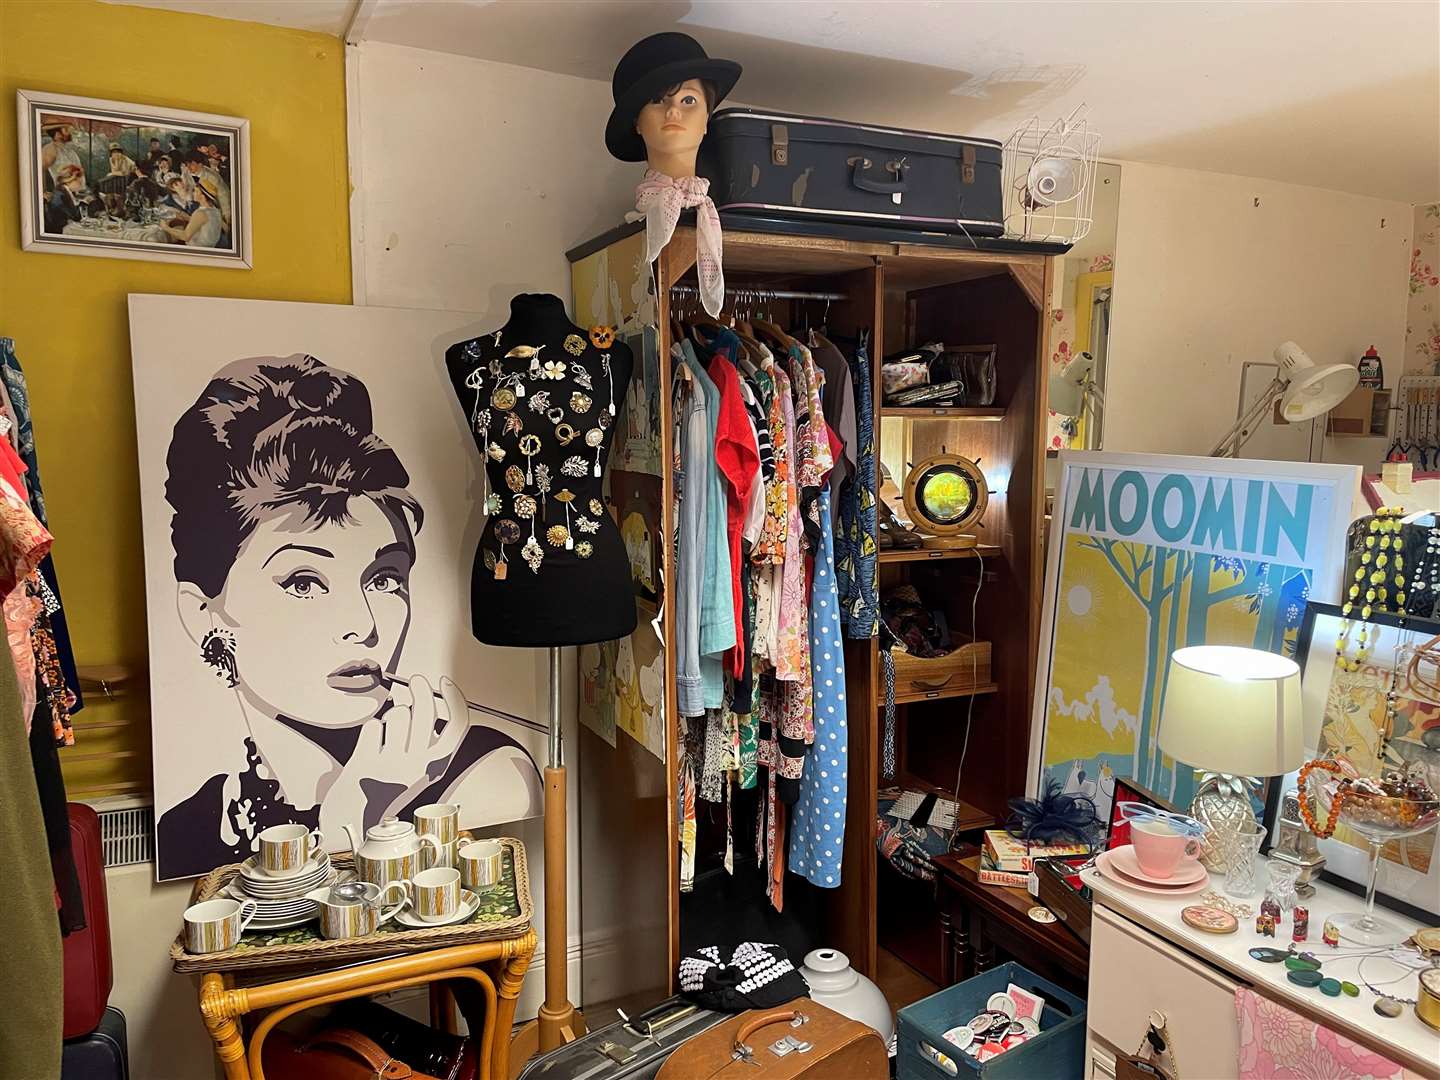 It sold vintage clothes, jewellery and posters